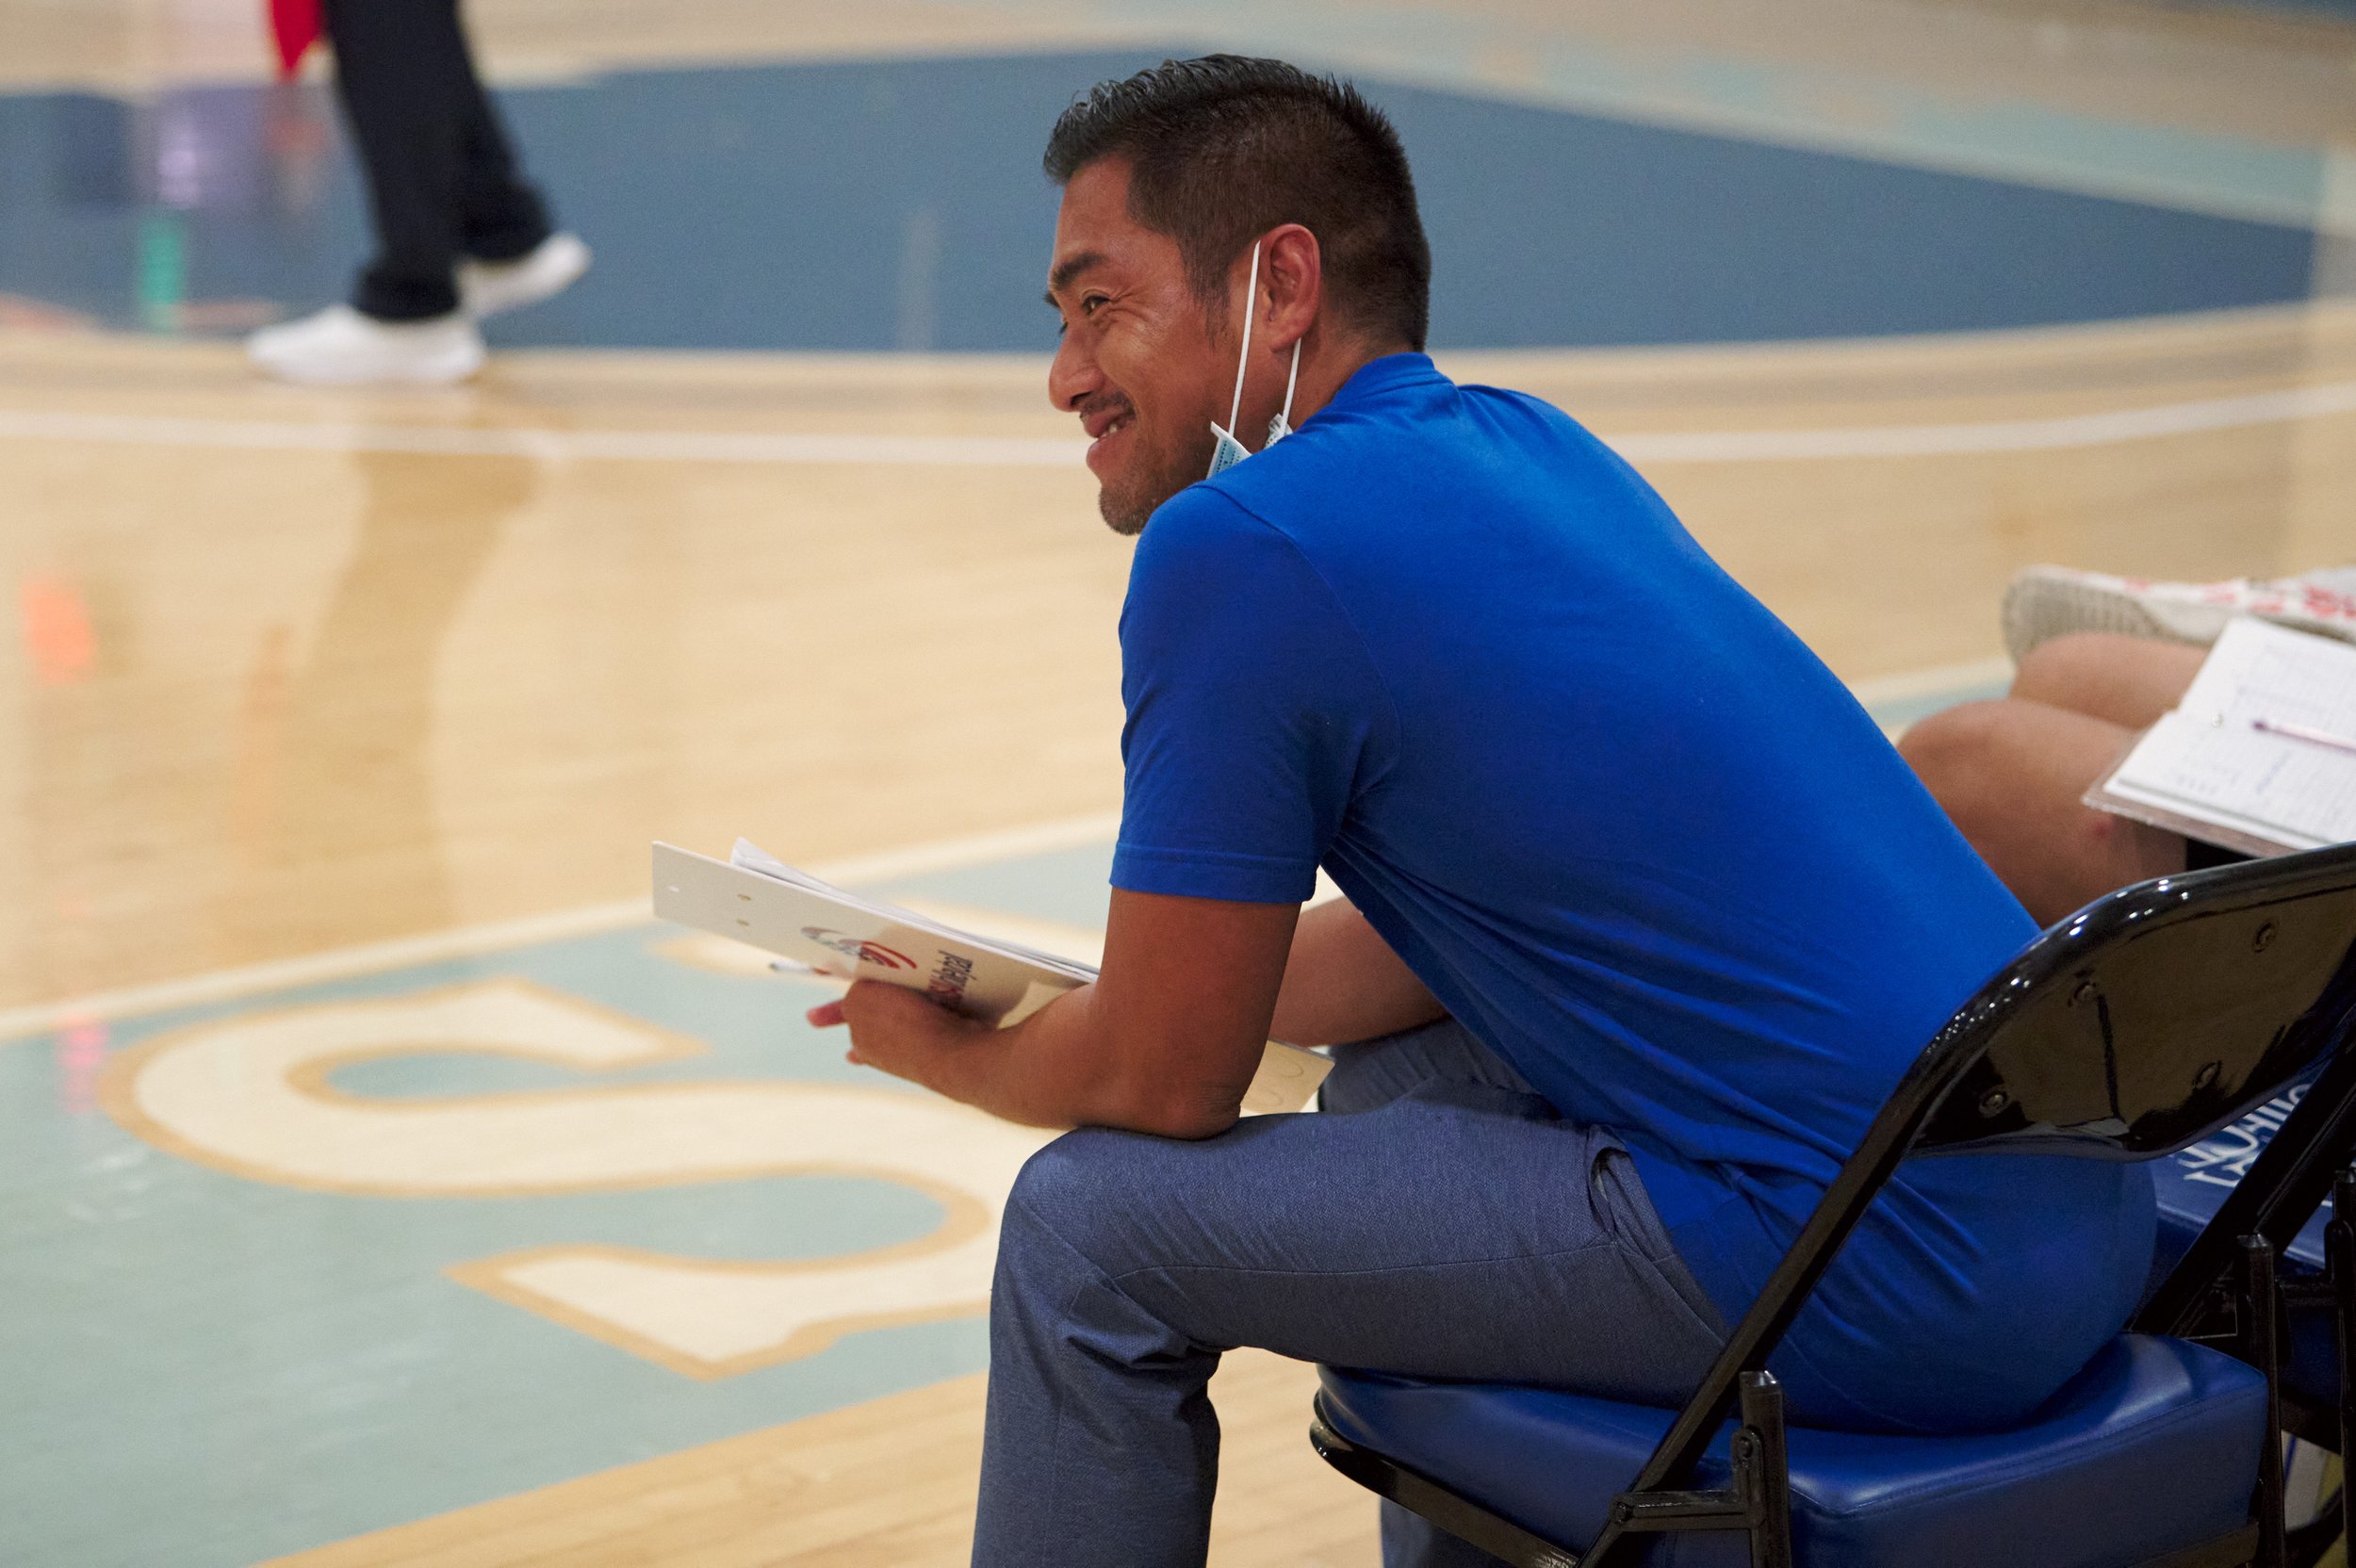  Santa Monica College Corsairs Women's Volleyball Head Coach Christian Cammayo during the match against the Bakersfield College Renegades on Wednesday, Sept. 28, 2022, at the Corsair Gym in Santa Monica, Calif. The Corsairs won 3-2. (Nicholas McCall 